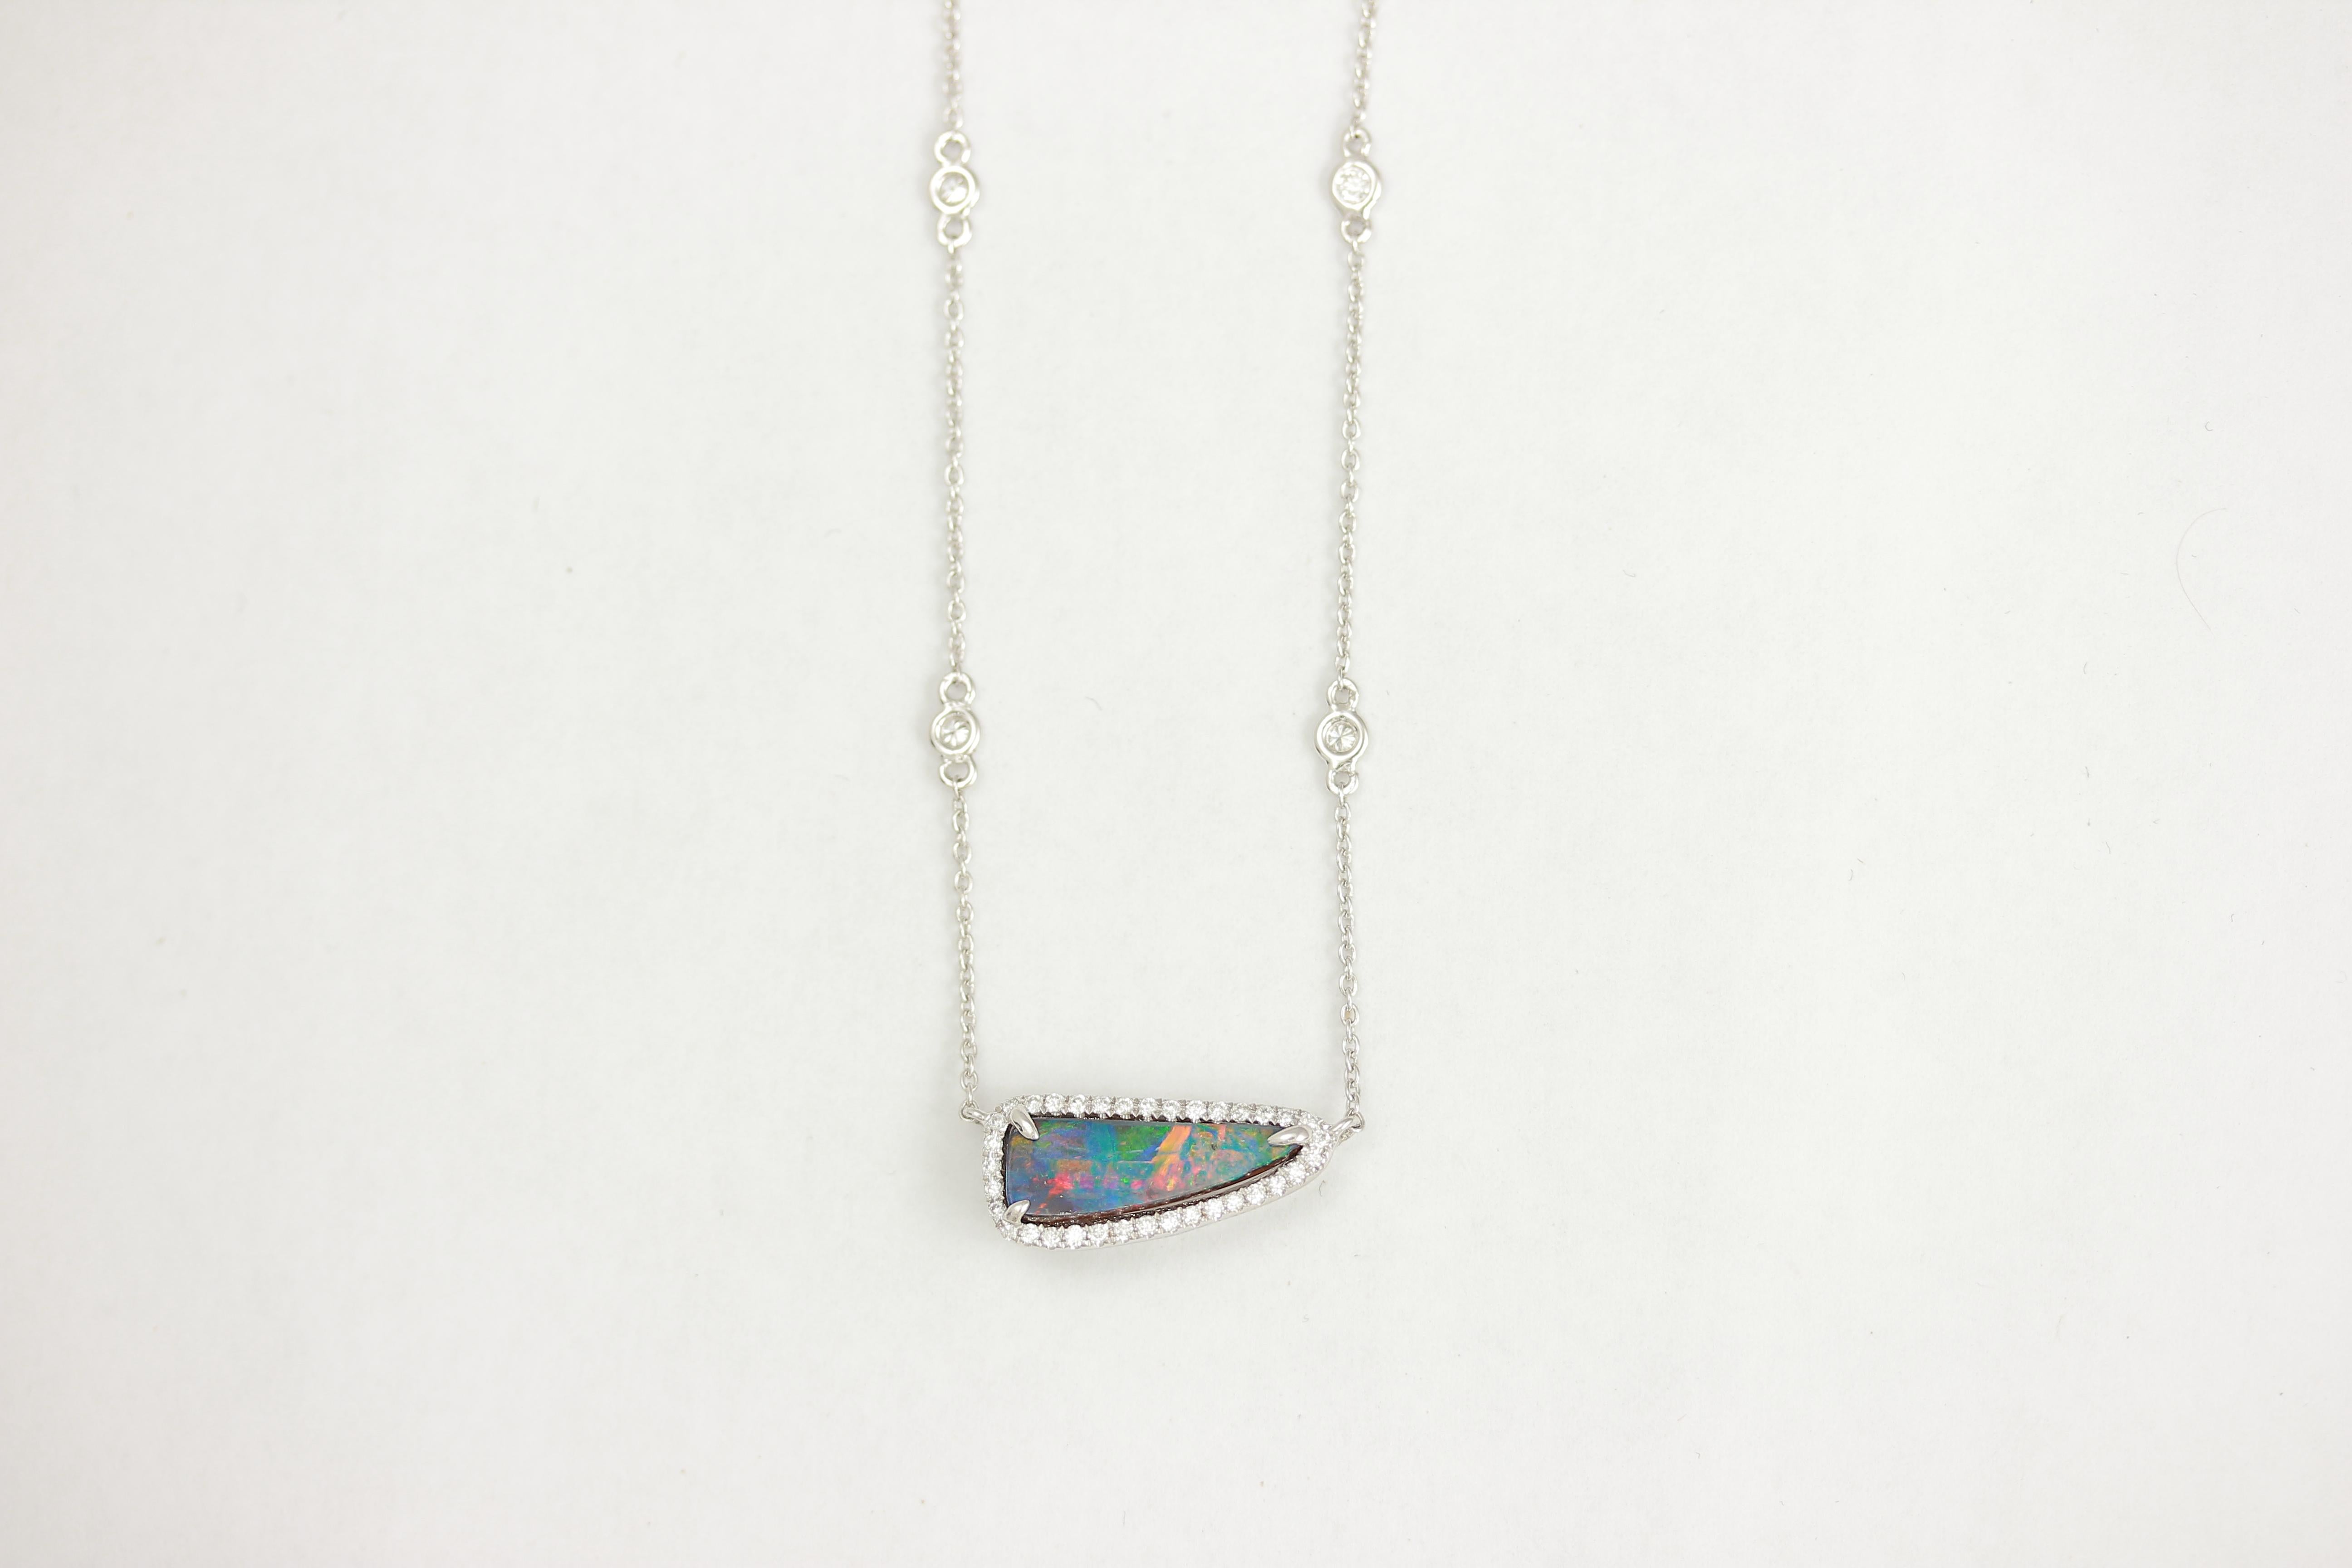 Contemporary Frederic Sage 1.47 Carat Opal and Diamond One of Kind Pendant Necklace